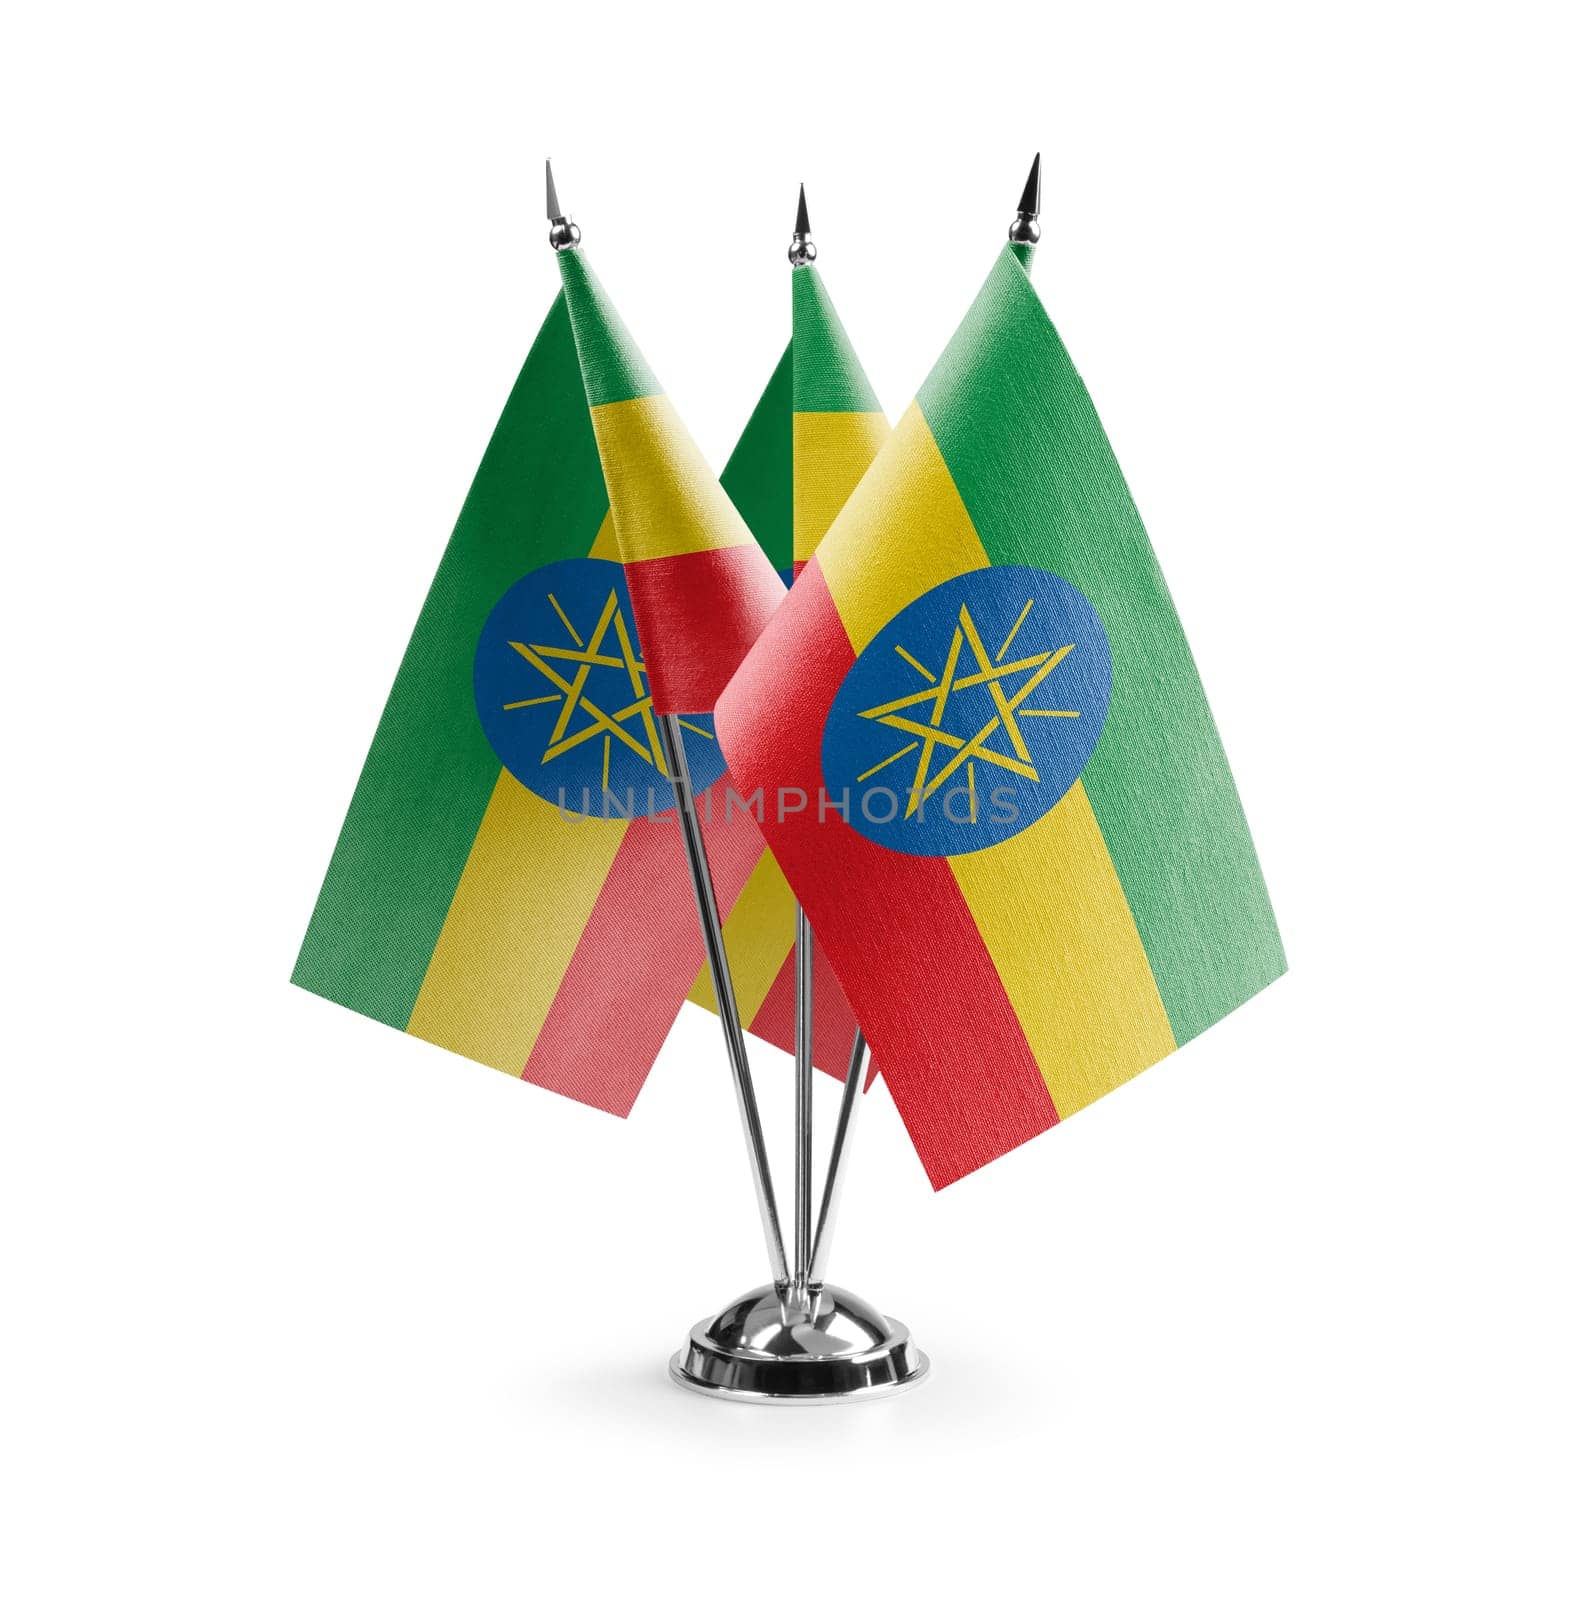 Small national flags of the Ethiopia on a white background.